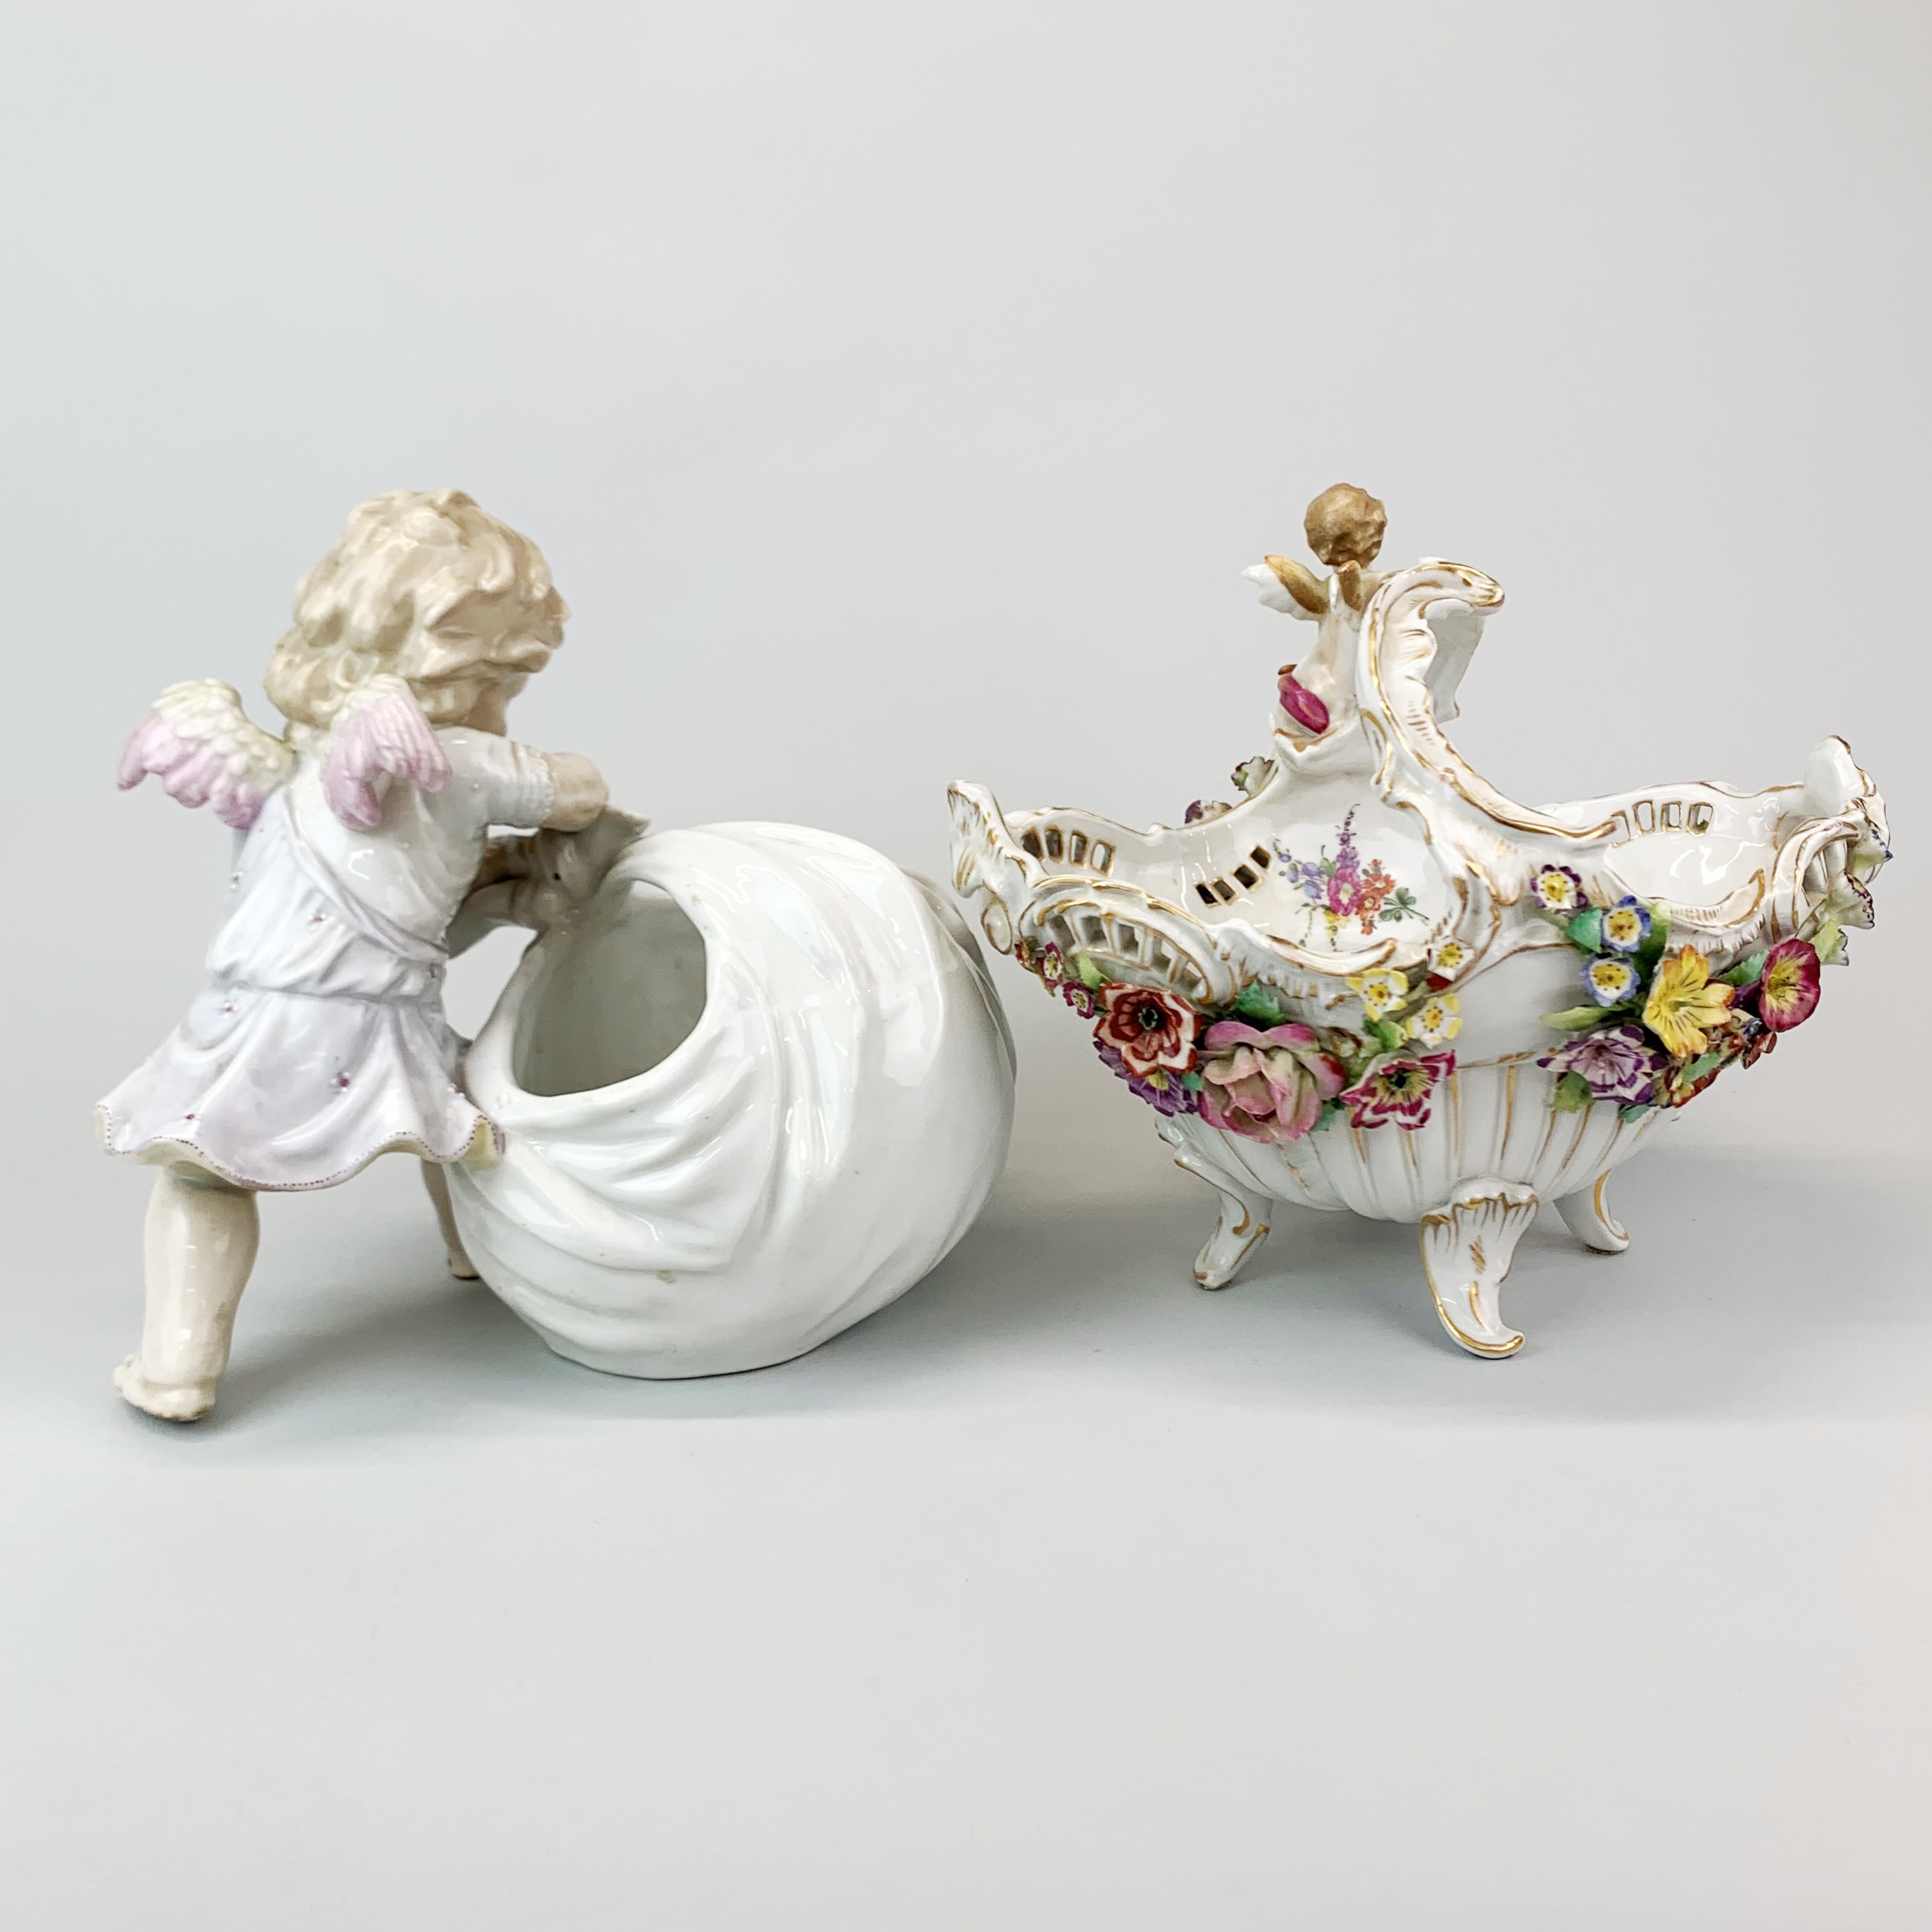 A 19th century German porcelain figure of a cherub with a basket, H. 21cm. together with a further - Image 3 of 3